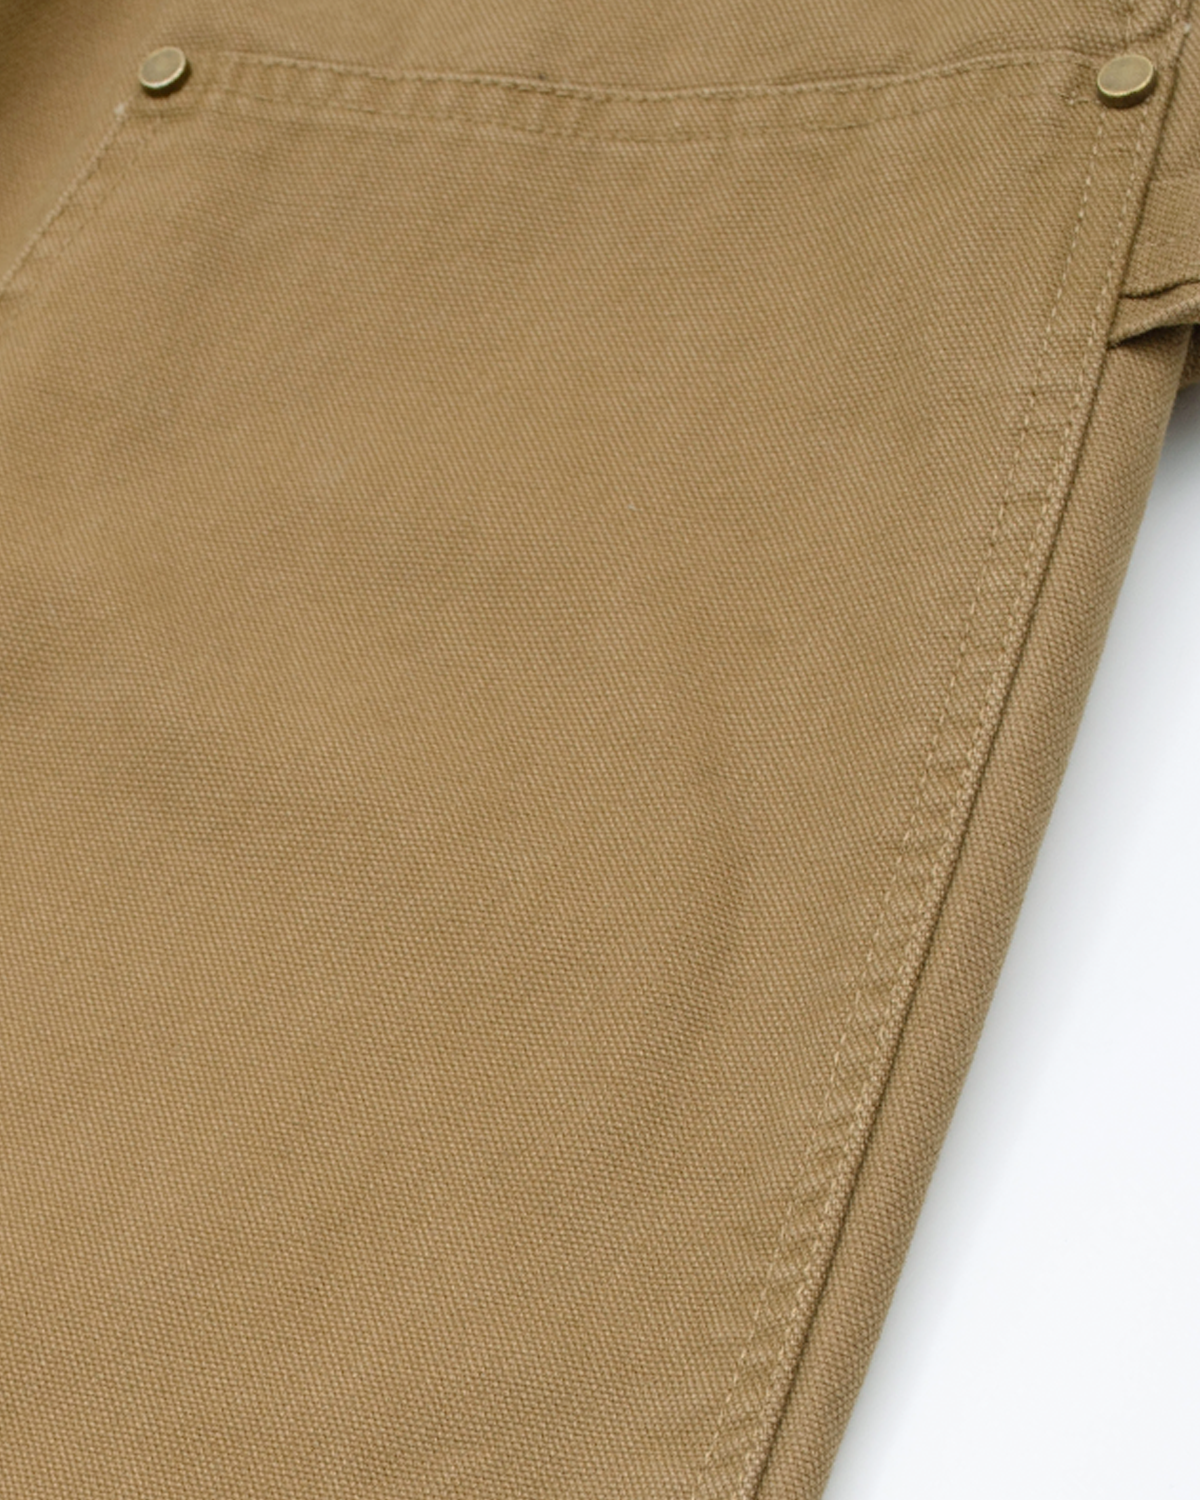 Off the label double-knee work pants brown